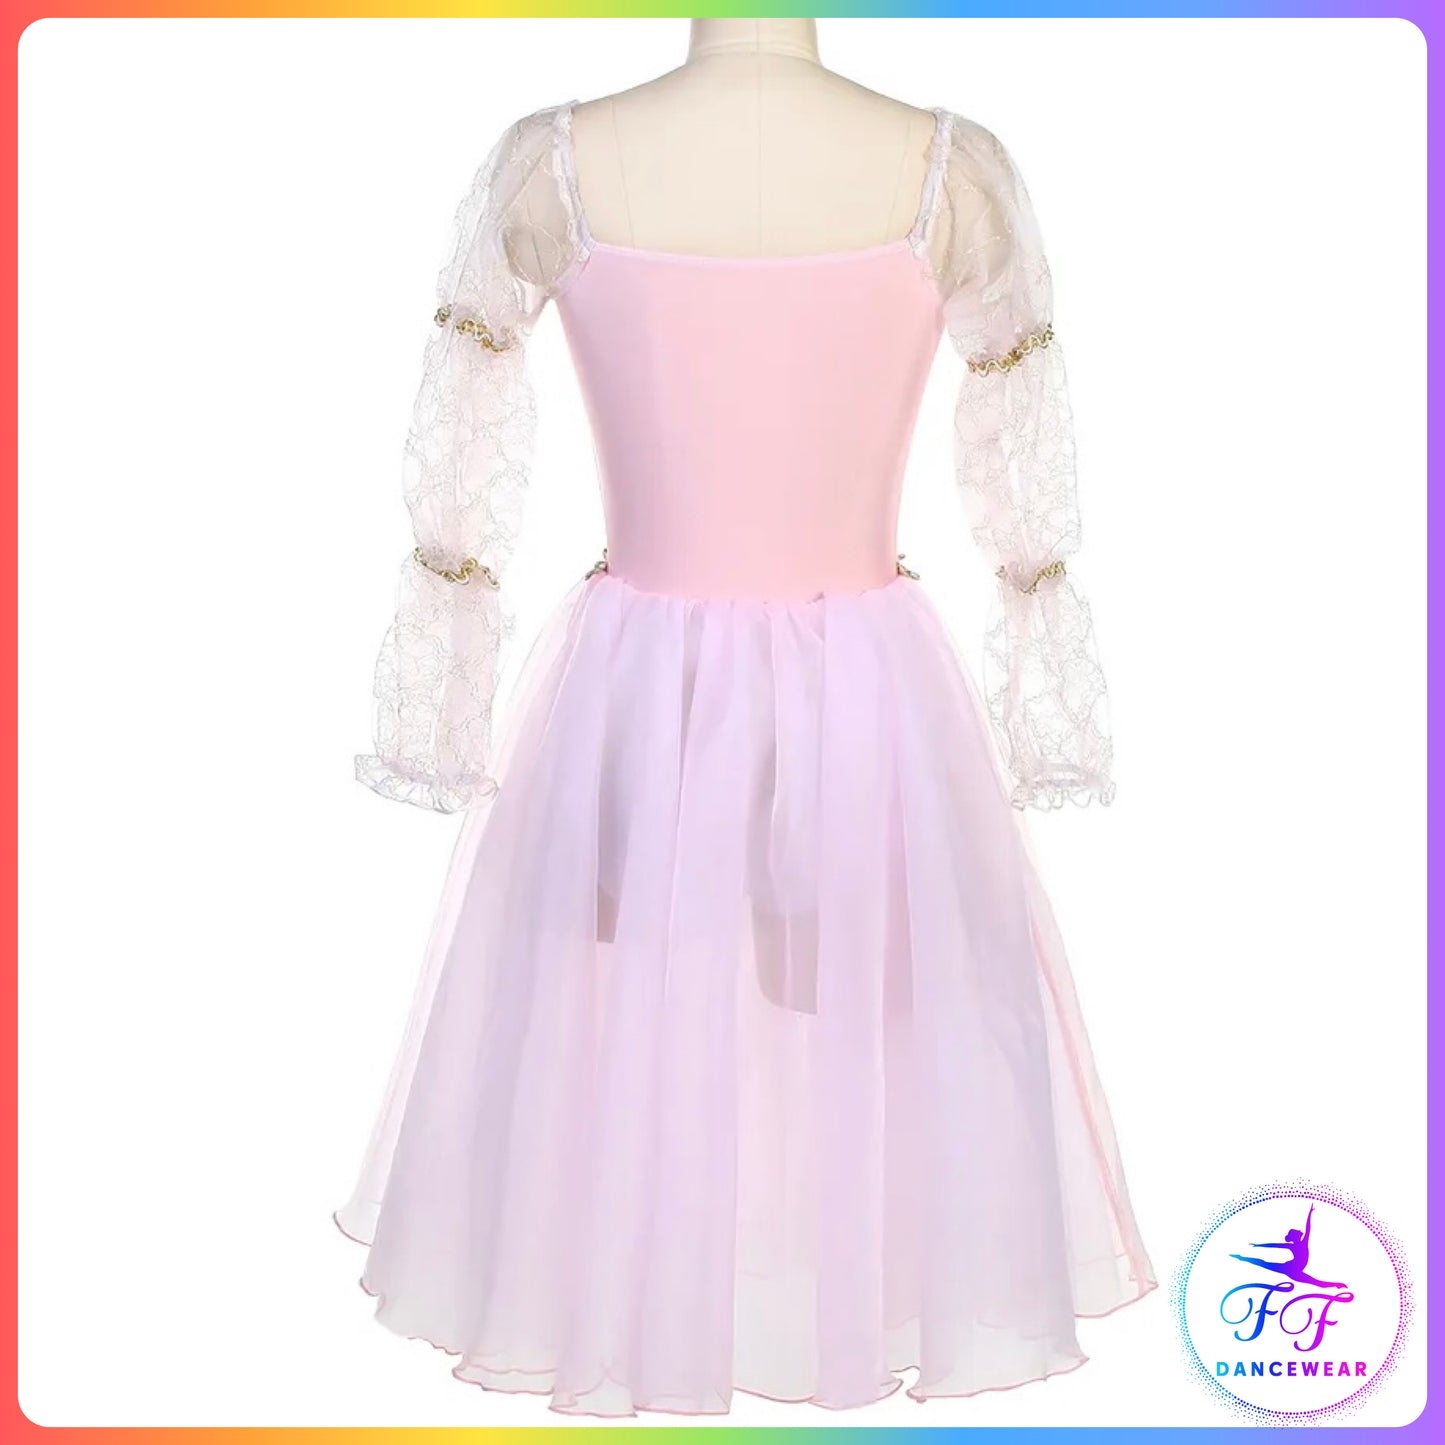 Long Sleeve Romantic Tutu in Blue or Pink (Child & Adult Sizes)